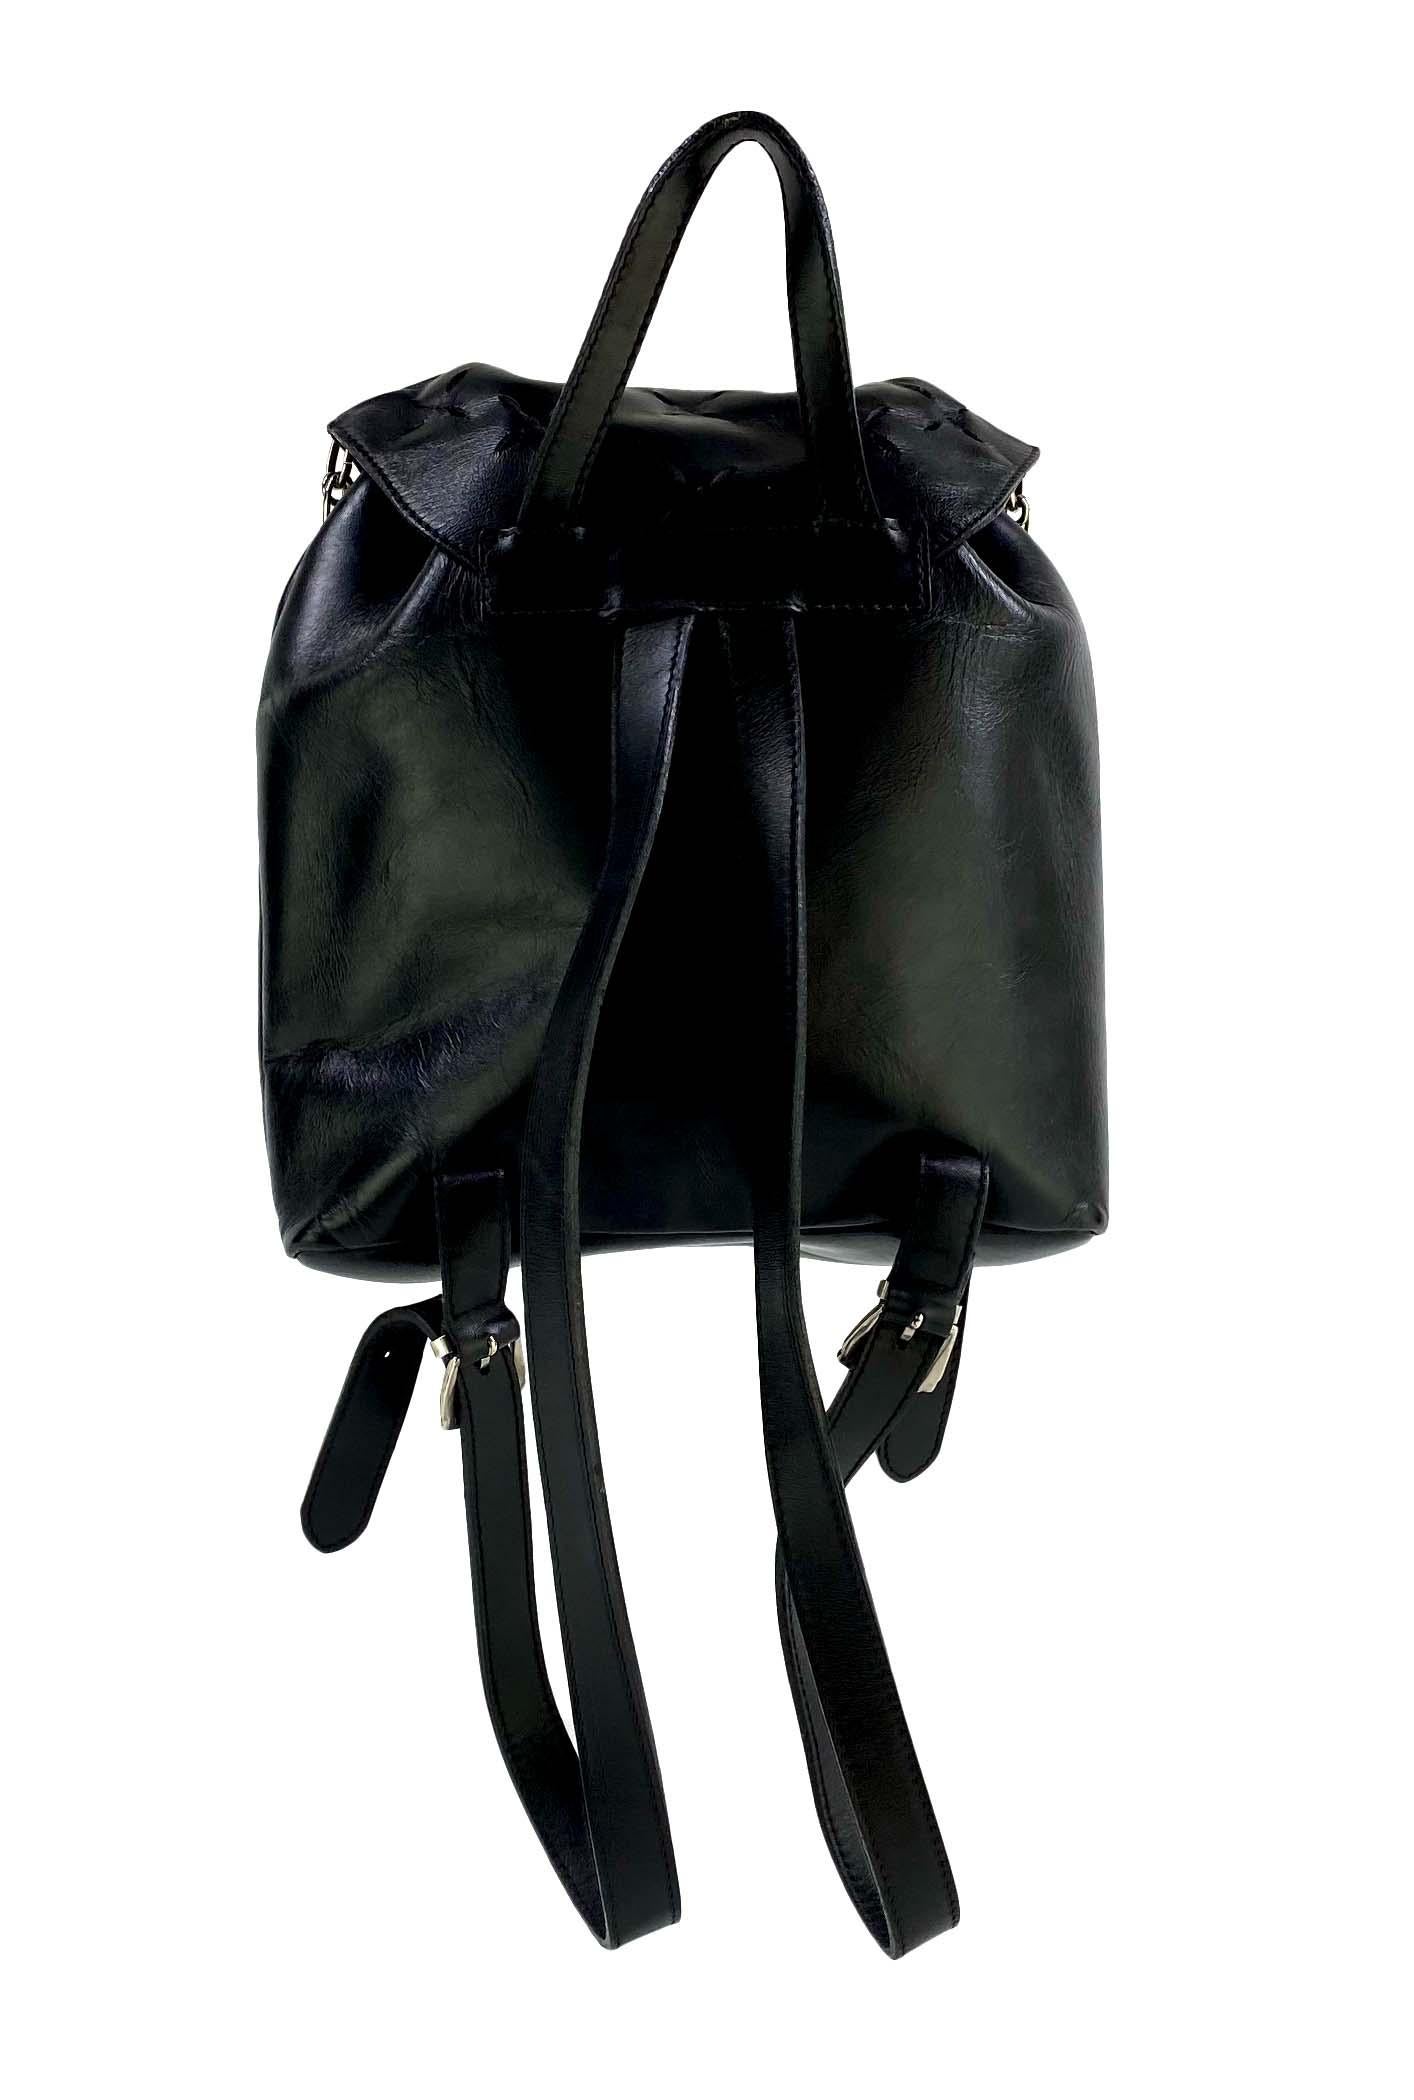 S/S 1994 Gianni Versace Safety Pin Cut Out Black Leather Mini Runway Backpack In Excellent Condition For Sale In West Hollywood, CA